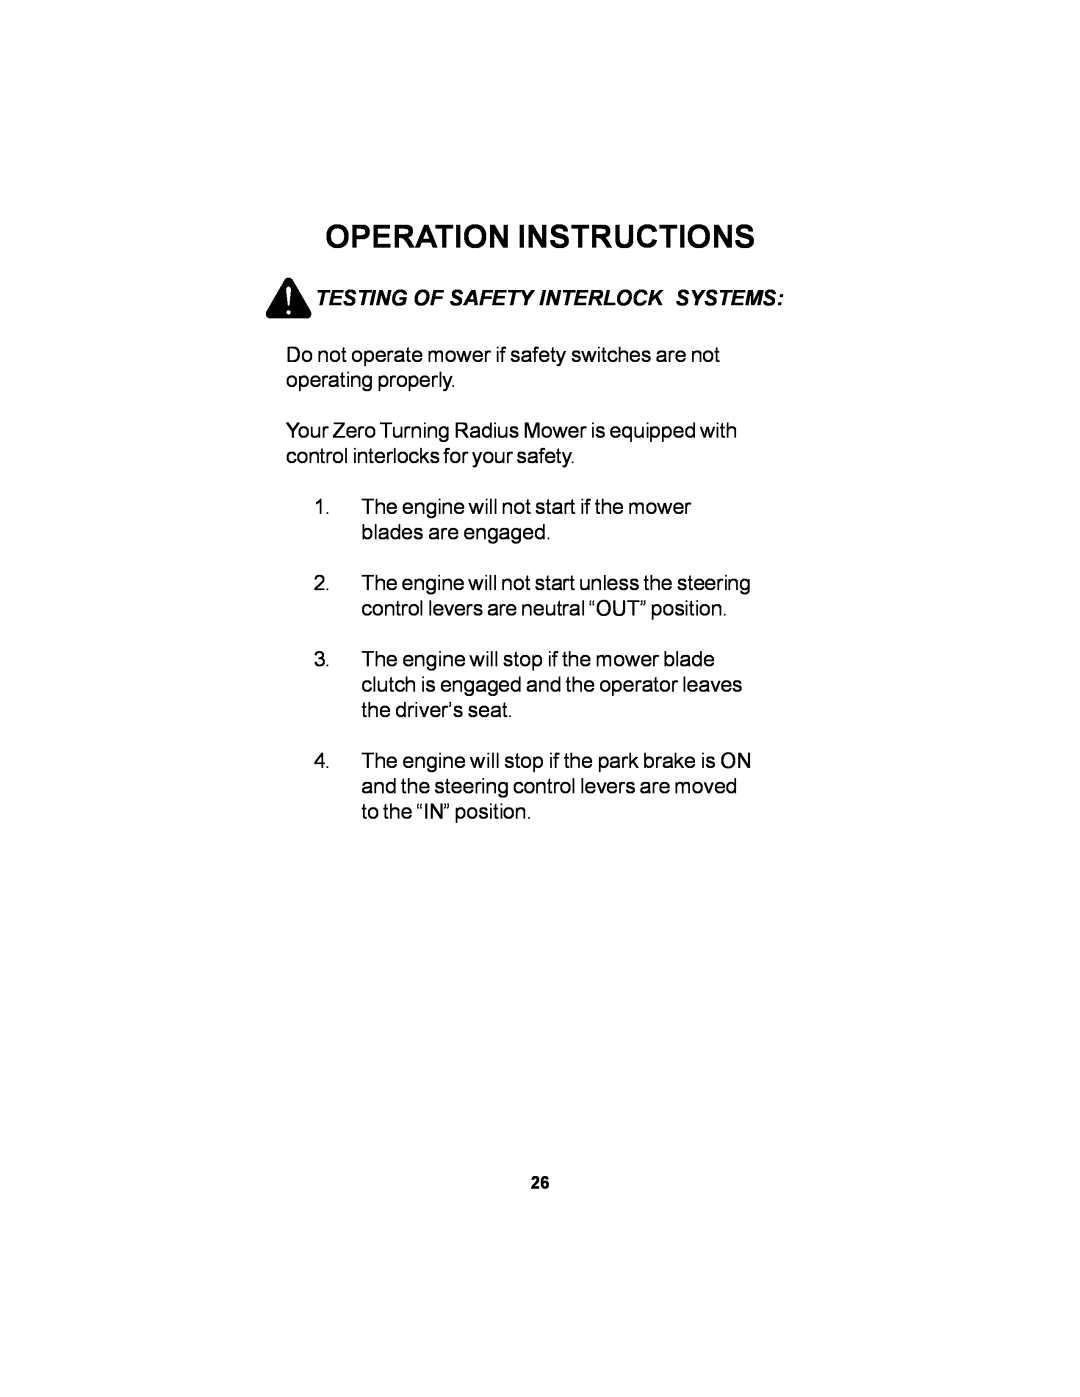 Dixon 12881-106 manual Operation Instructions, Testing Of Safety Interlock Systems 